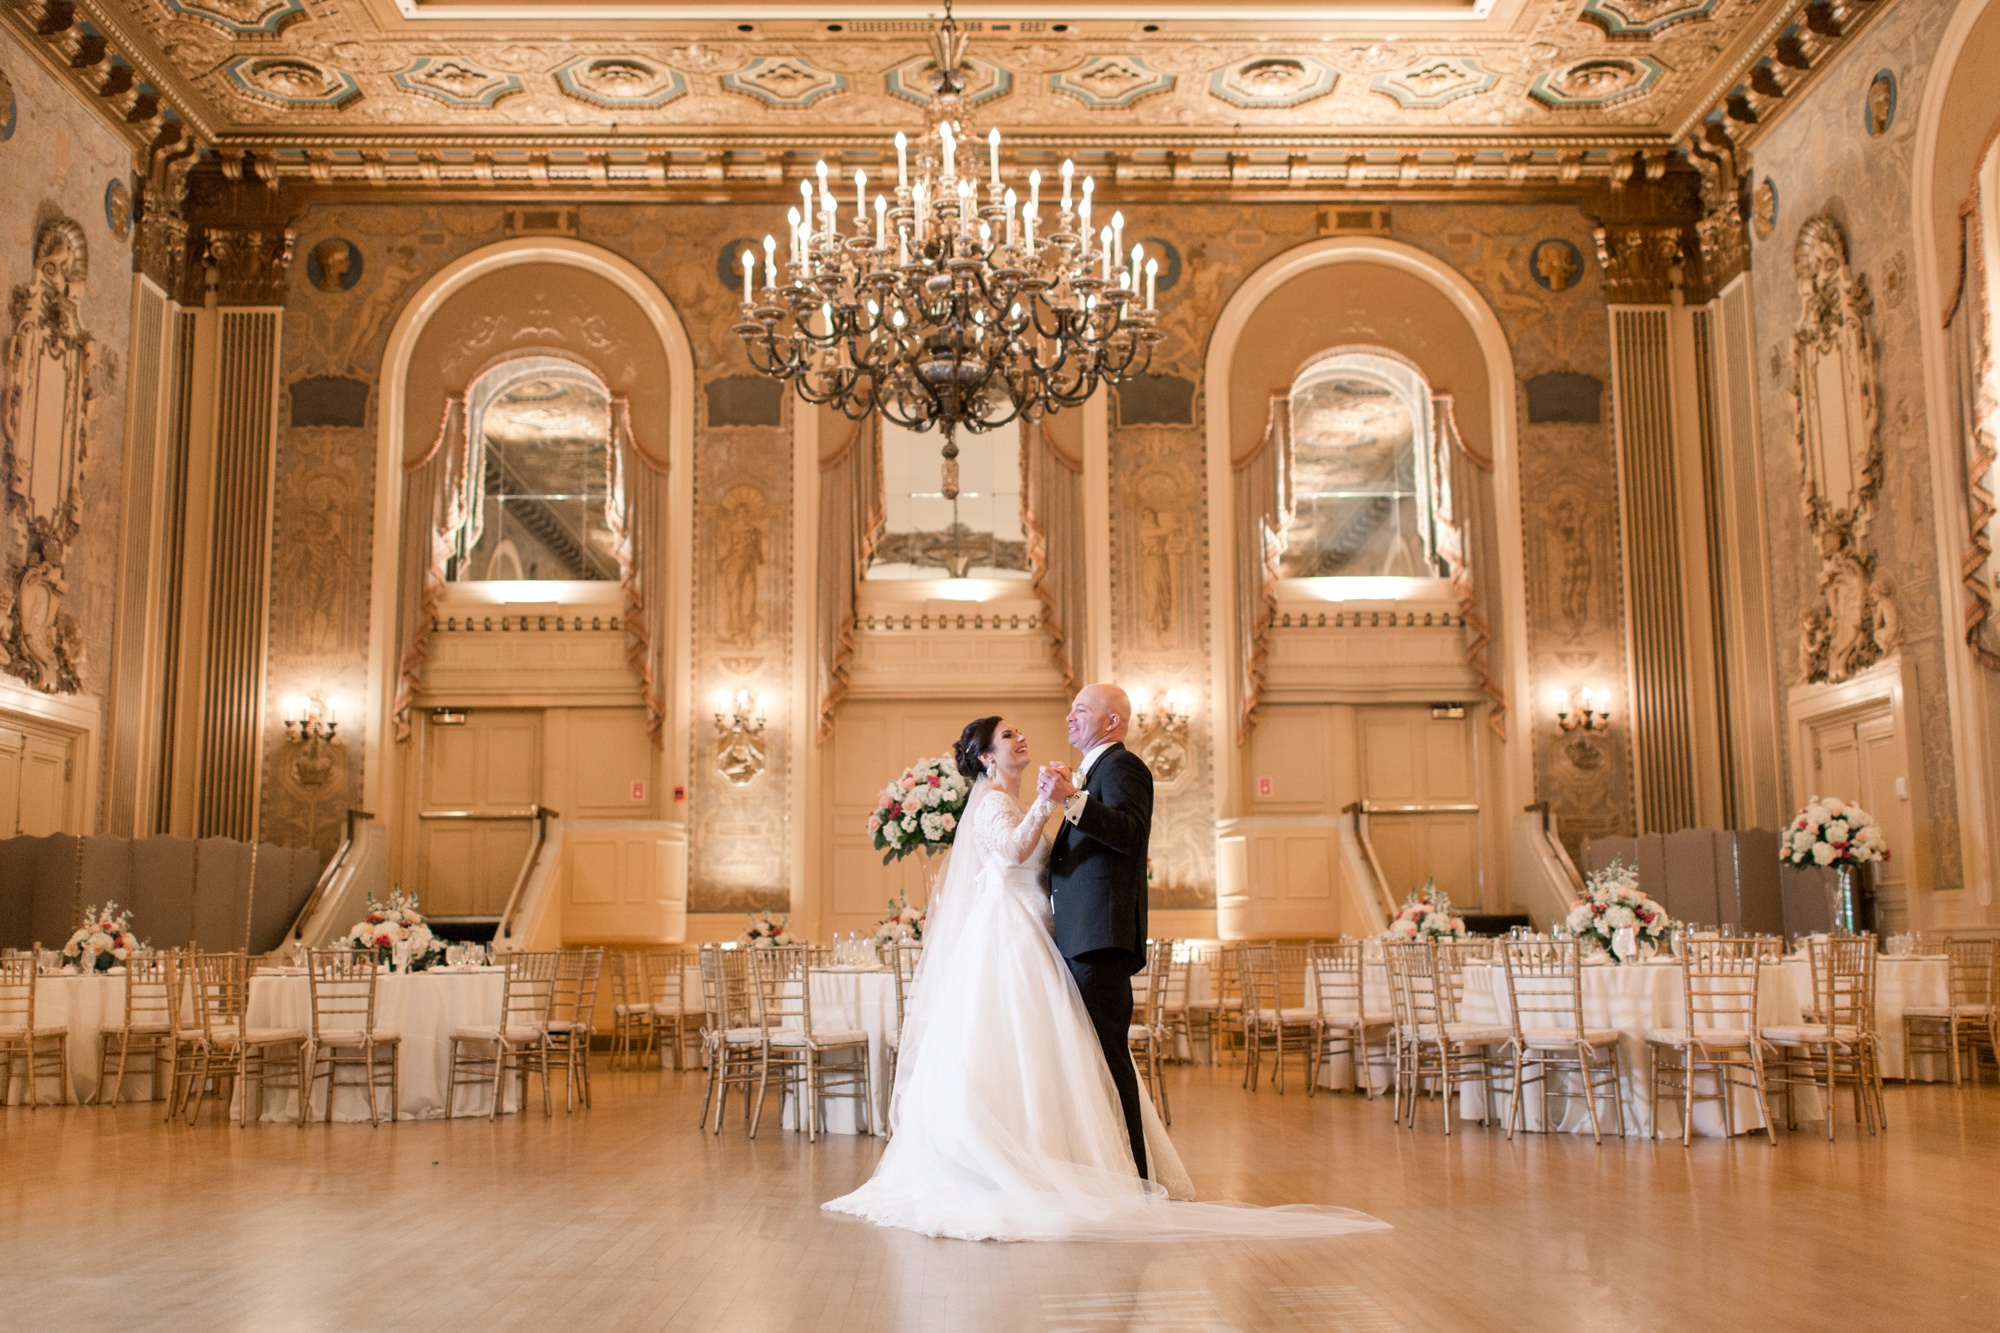 Bride and Groom first dance at Hotel Dupont